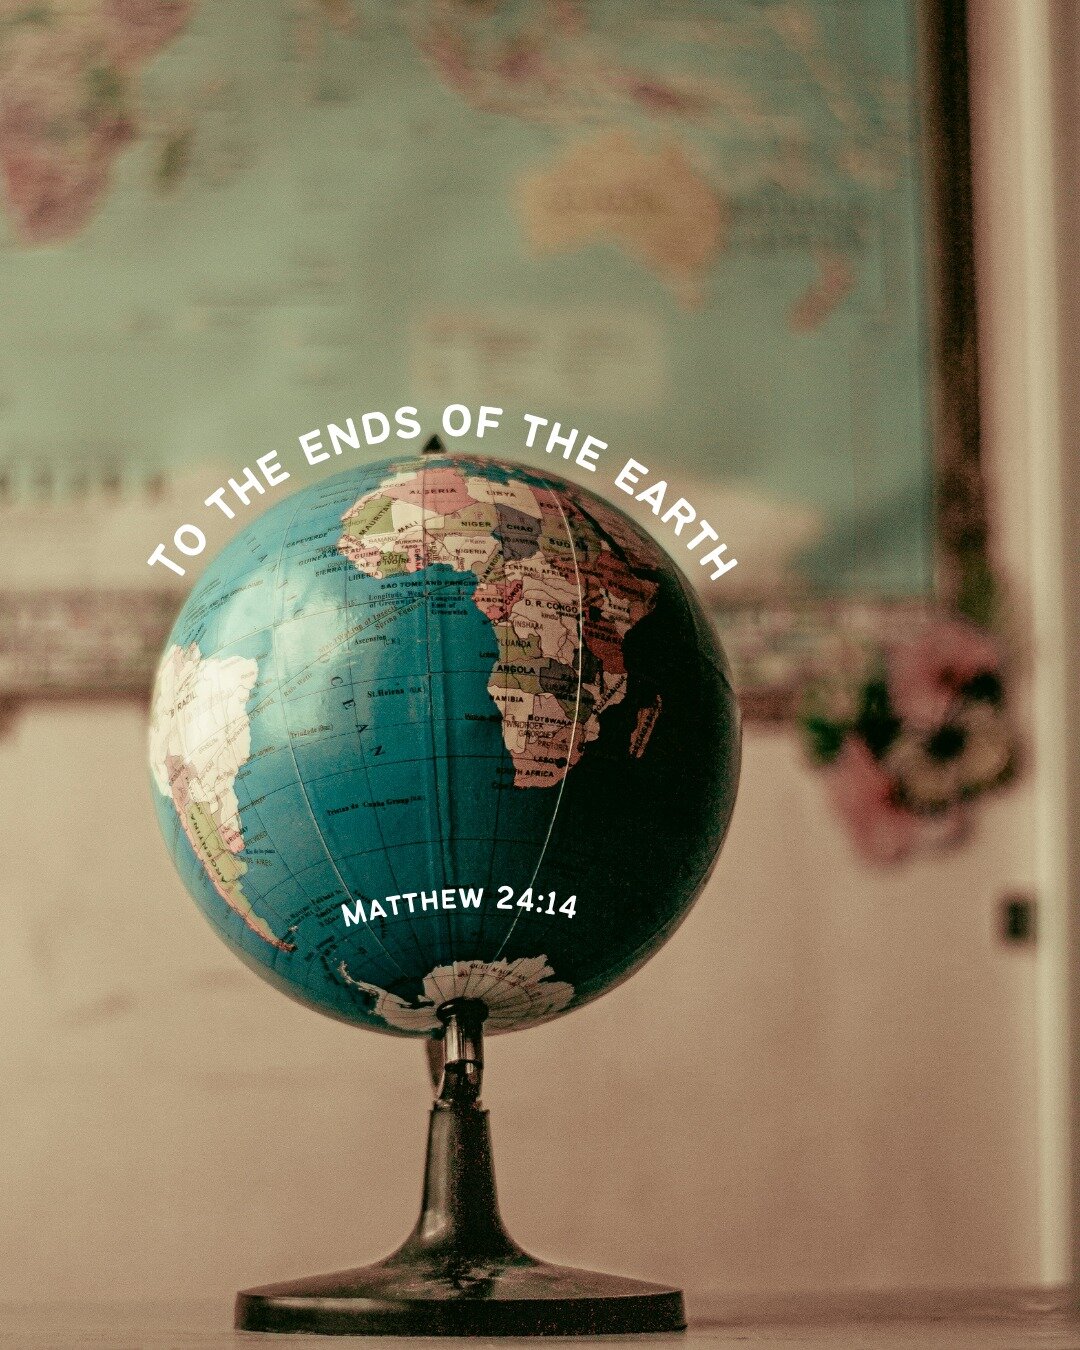 &quot;And this gospel of the kingdom will be preached in the whole world as a testimony to all nations, and then the end will come.&quot; #Matthew24v14 #MidweekMotivation